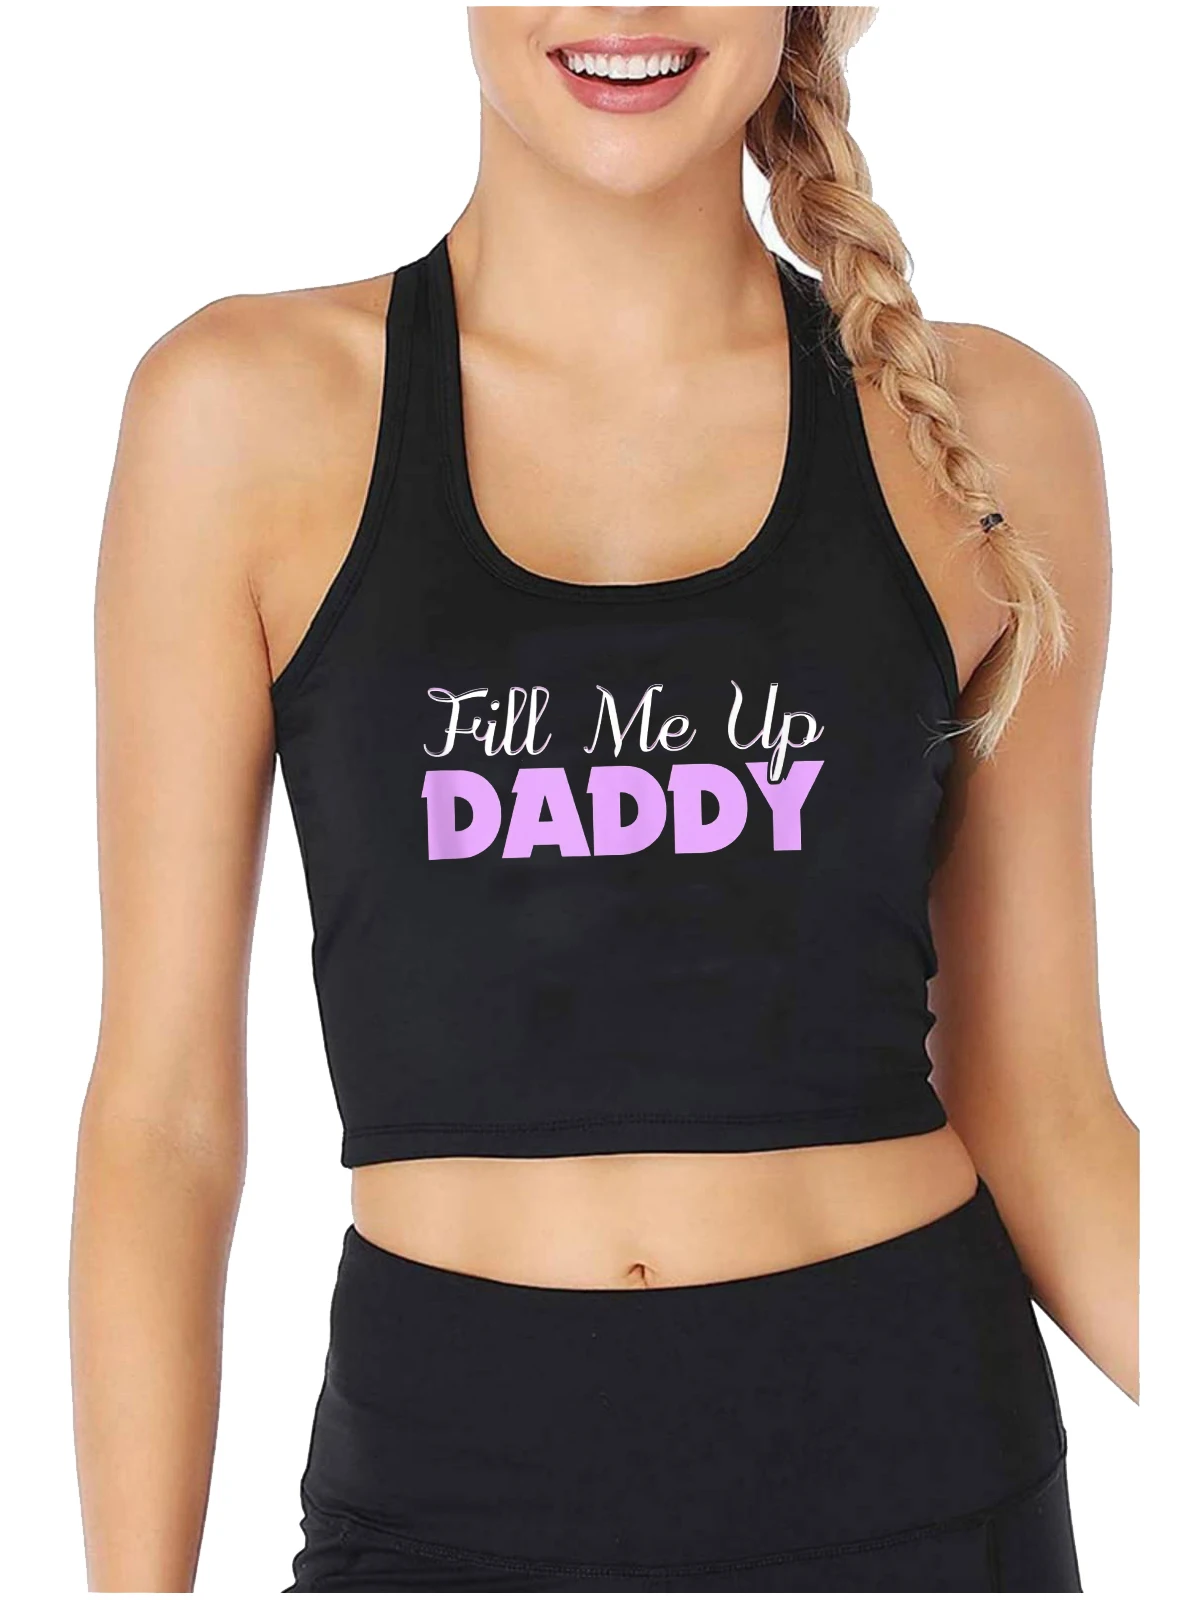 Best of Fill me up daddy